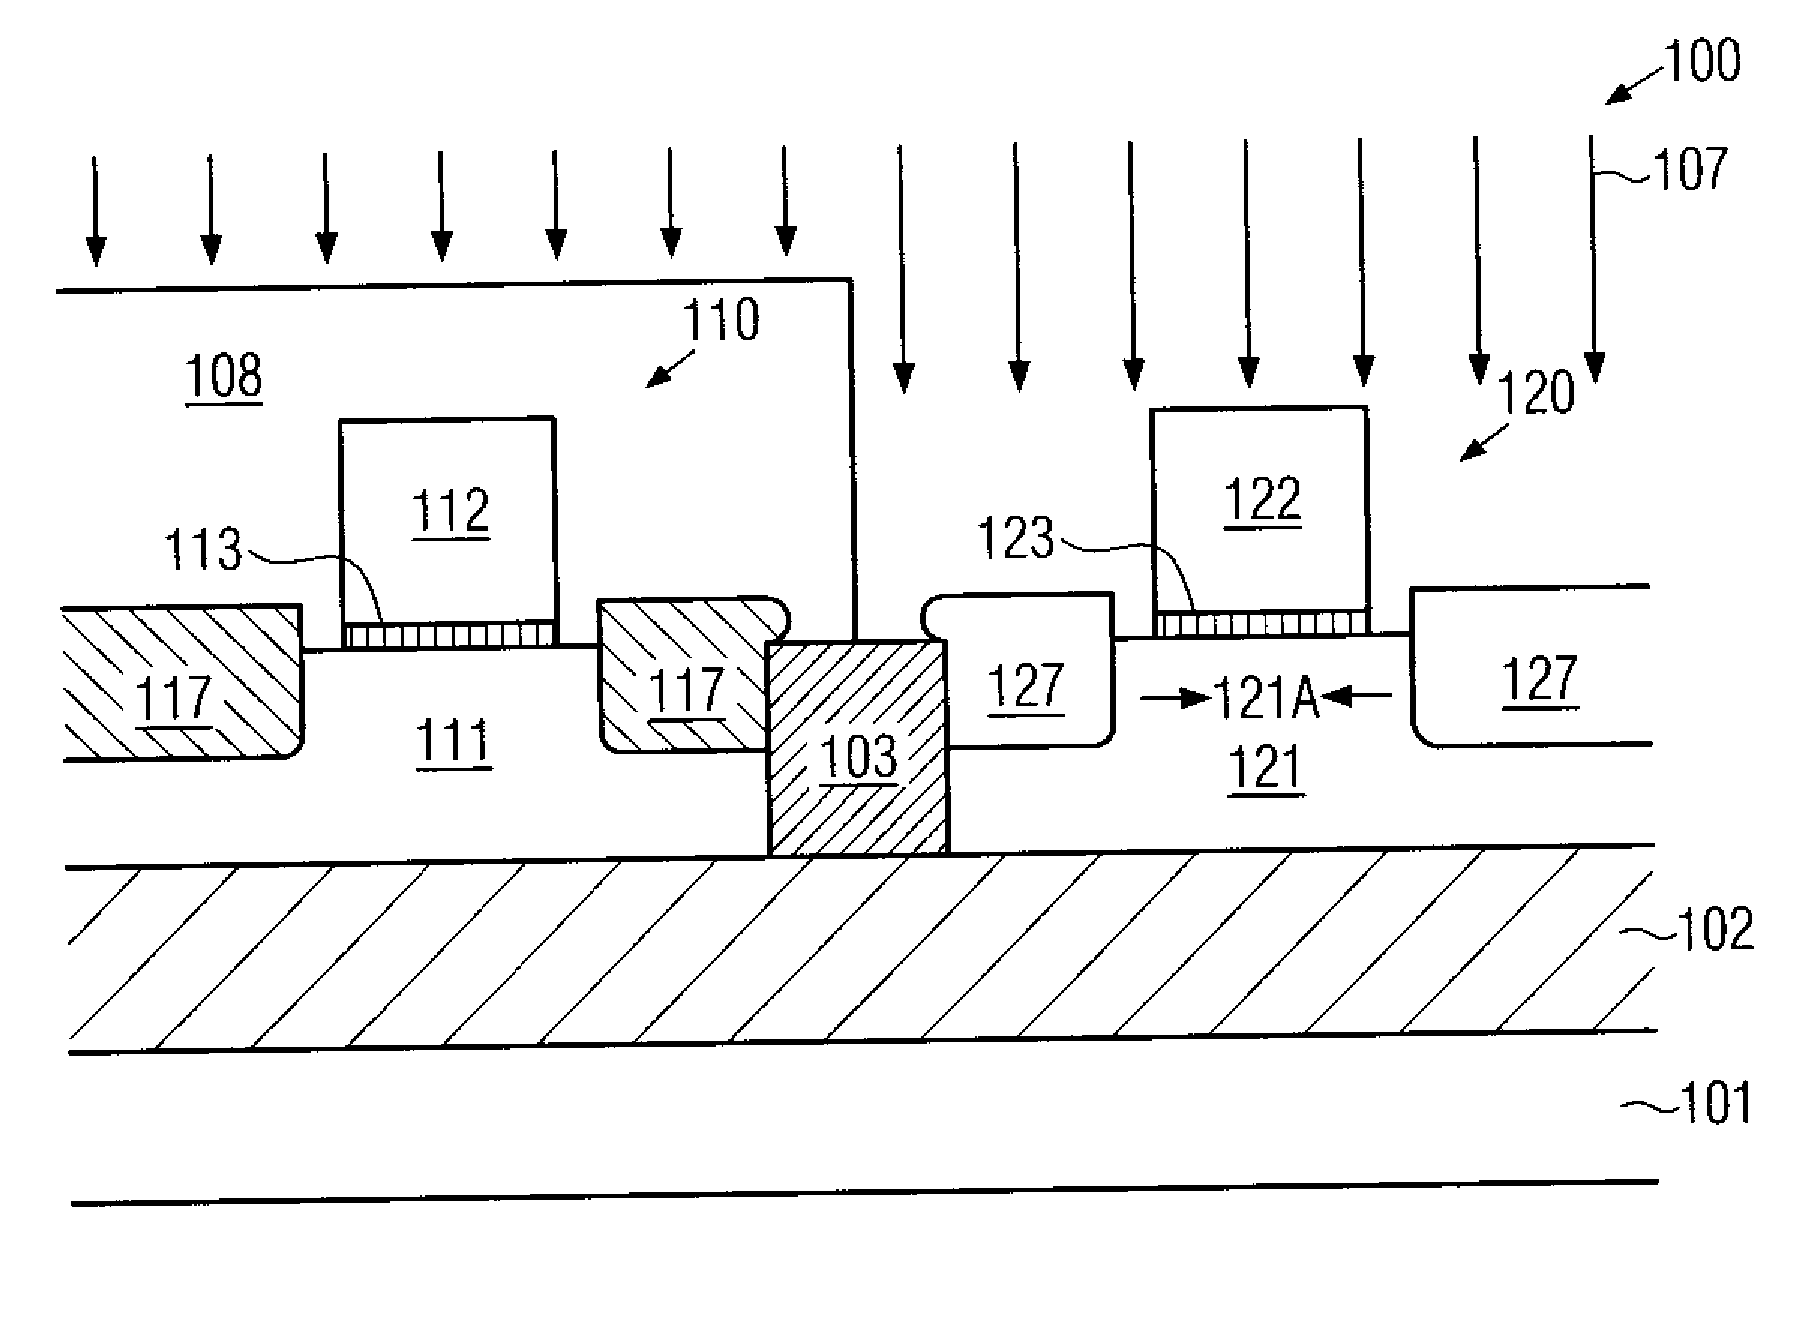 Technique for forming recessed strained drain/source regions in NMOS and PMOS transistors